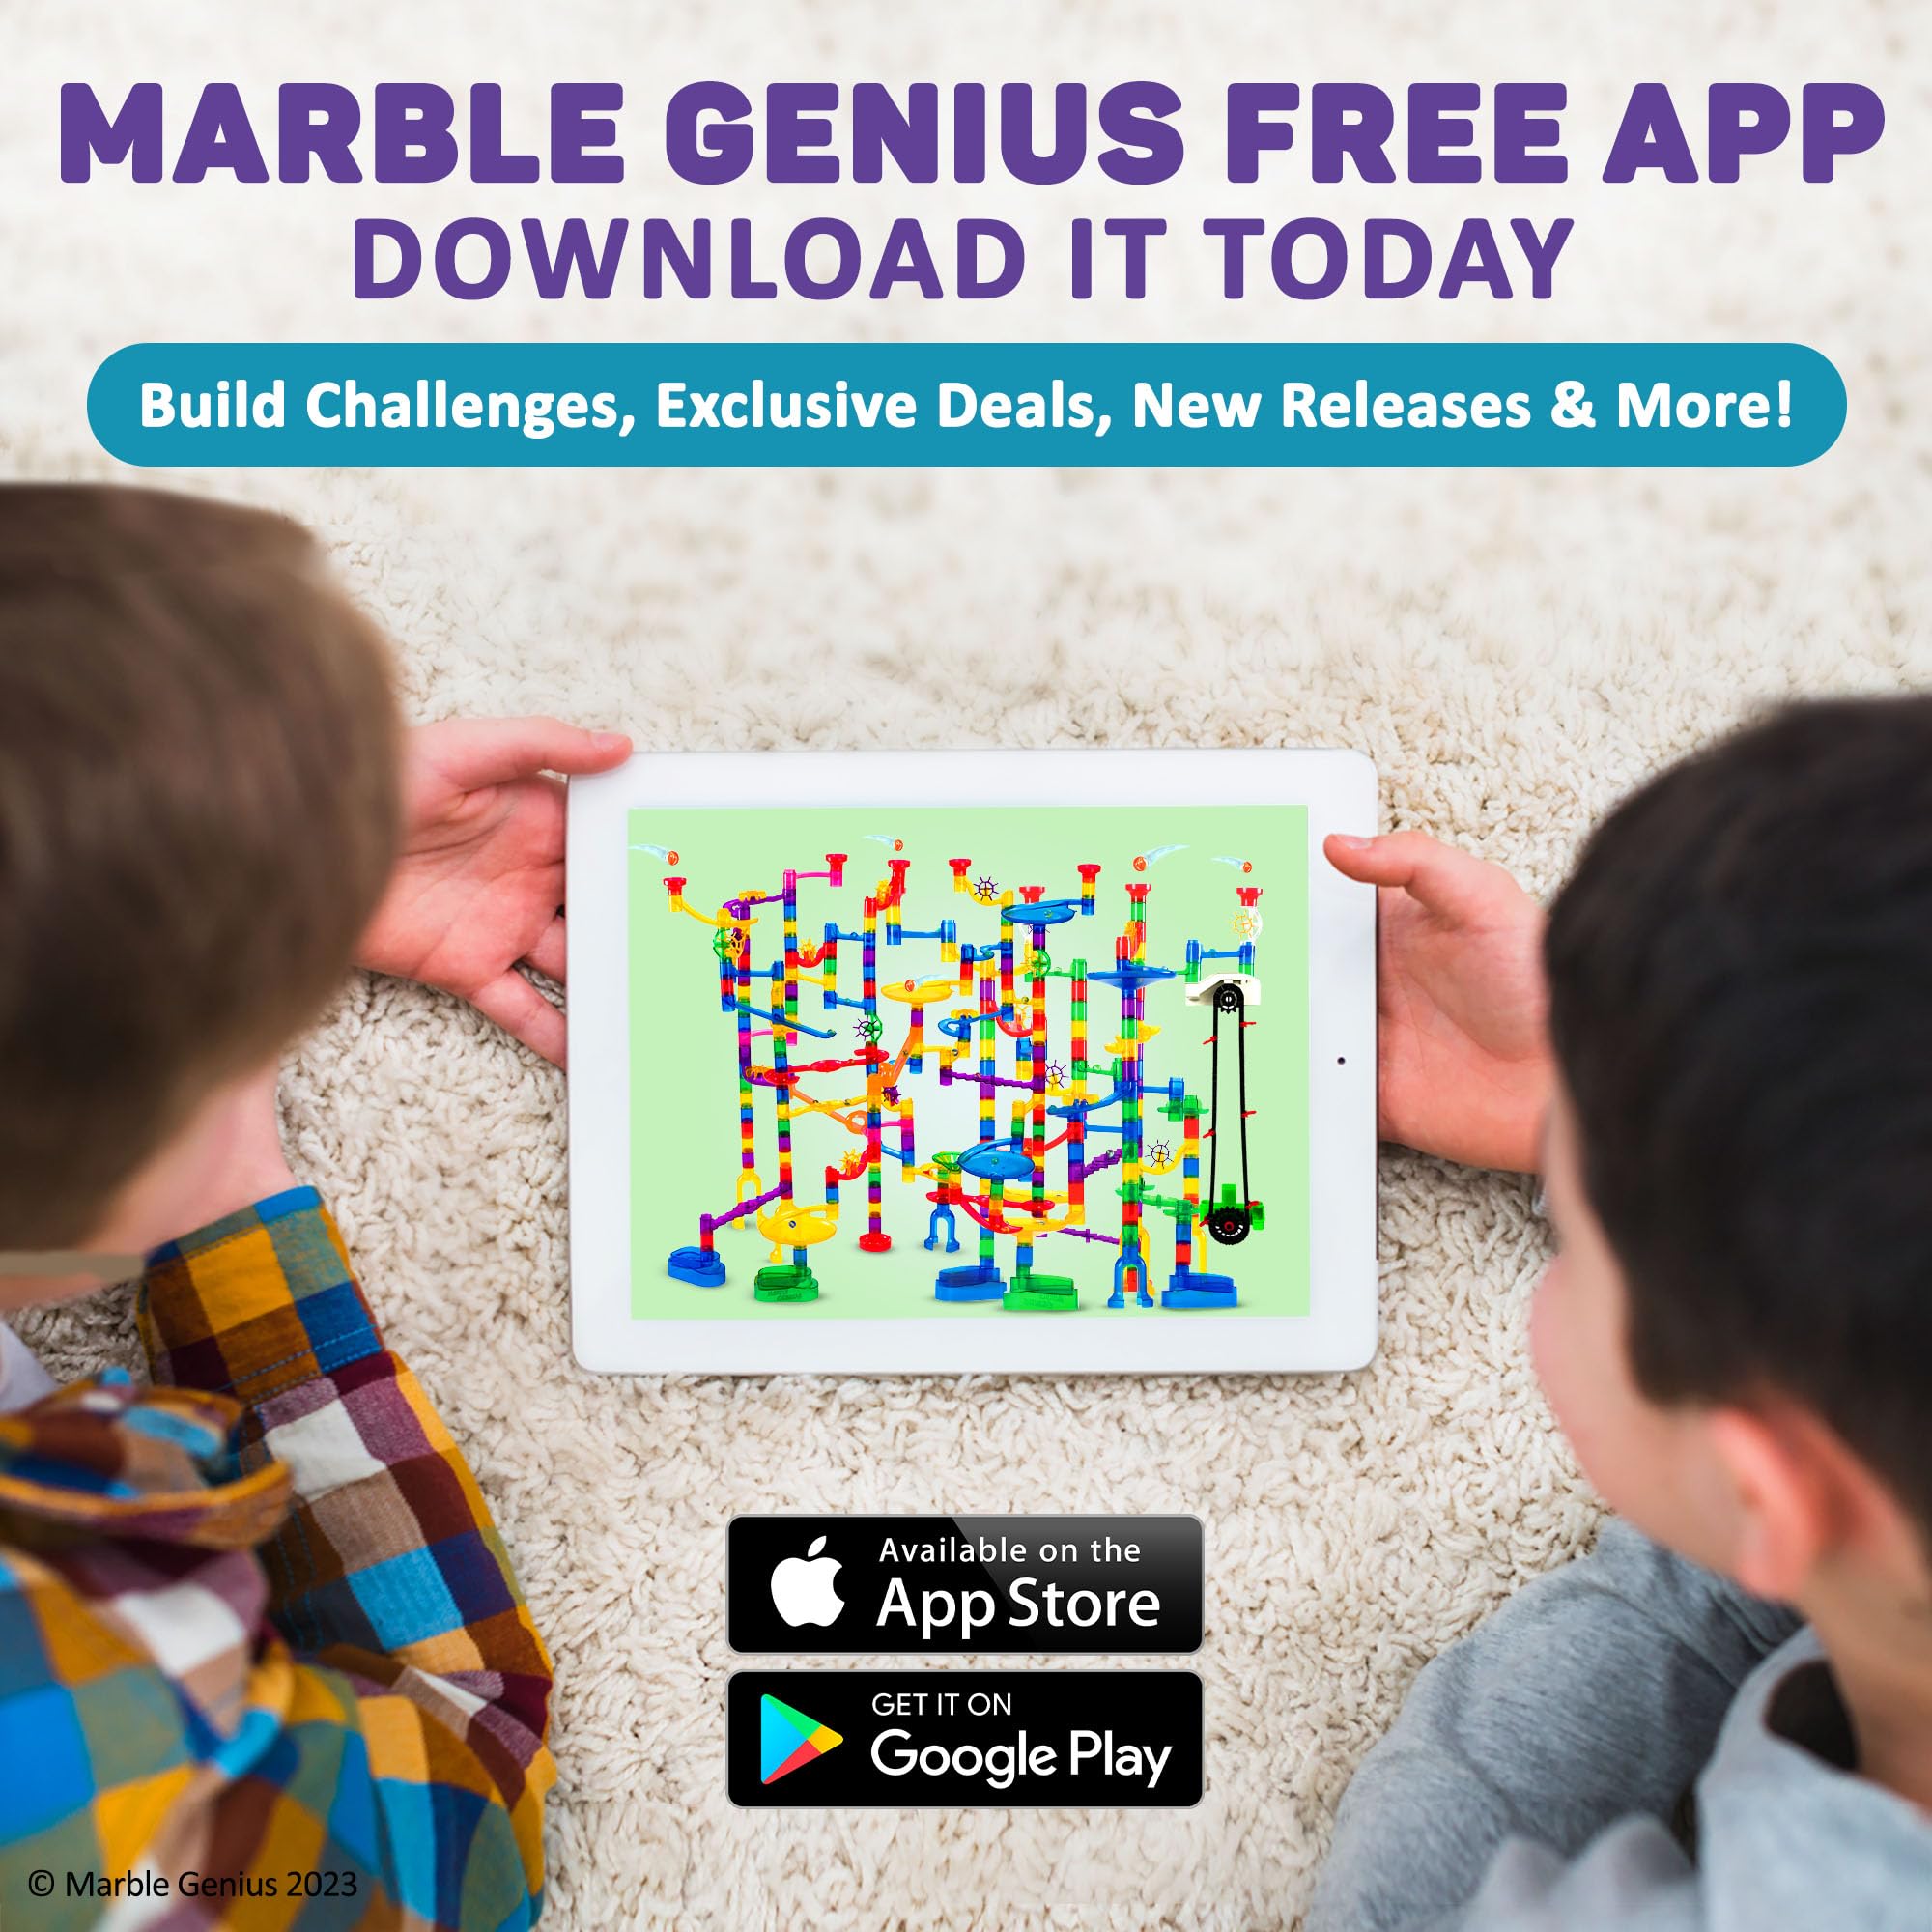 Marble Genius Bundle: Extreme Set (300 Pieces), Automatic Chain Lift and, Primary Booster Set (20 Pieces), Maze Track or Race Games for Kids, Adults, Teens, and Toddlers